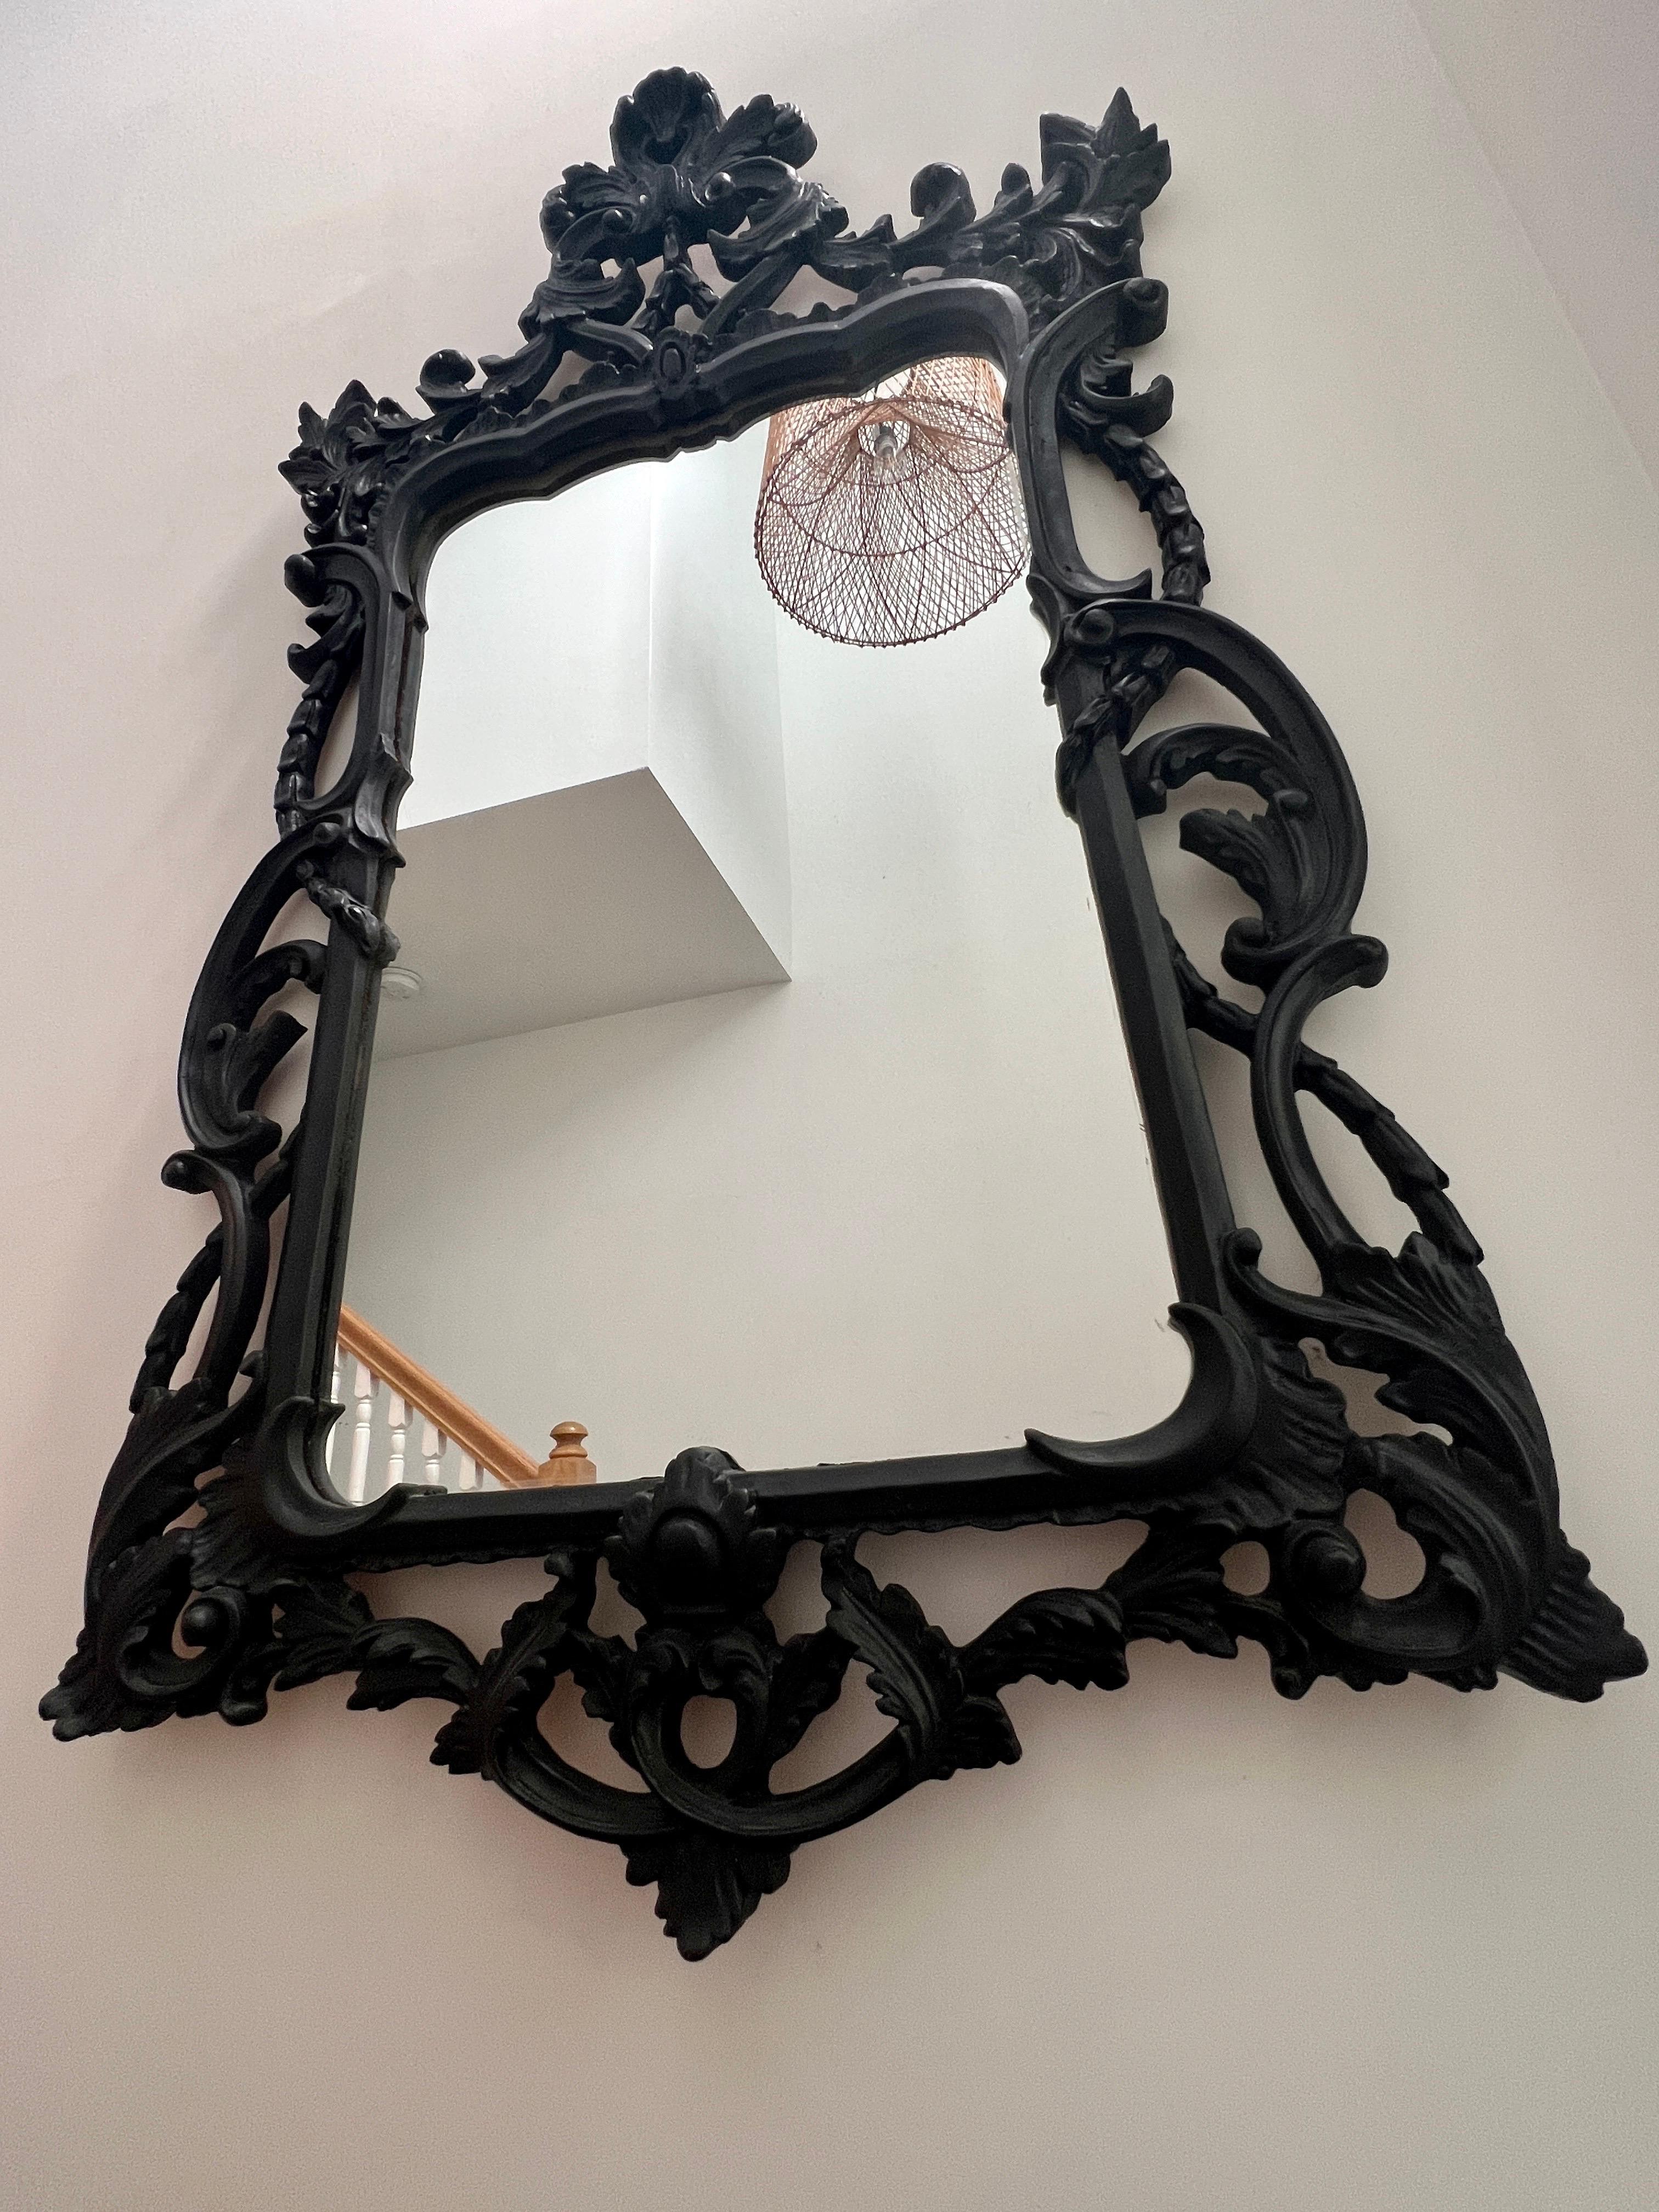 Large Hollywood Regency mirror with traditional Rococo style carved wood frame. Mirror has shield design featuring a series of hand carved scrolls with foliage details. The vintage black finish has a slightly distressed quality which gives the